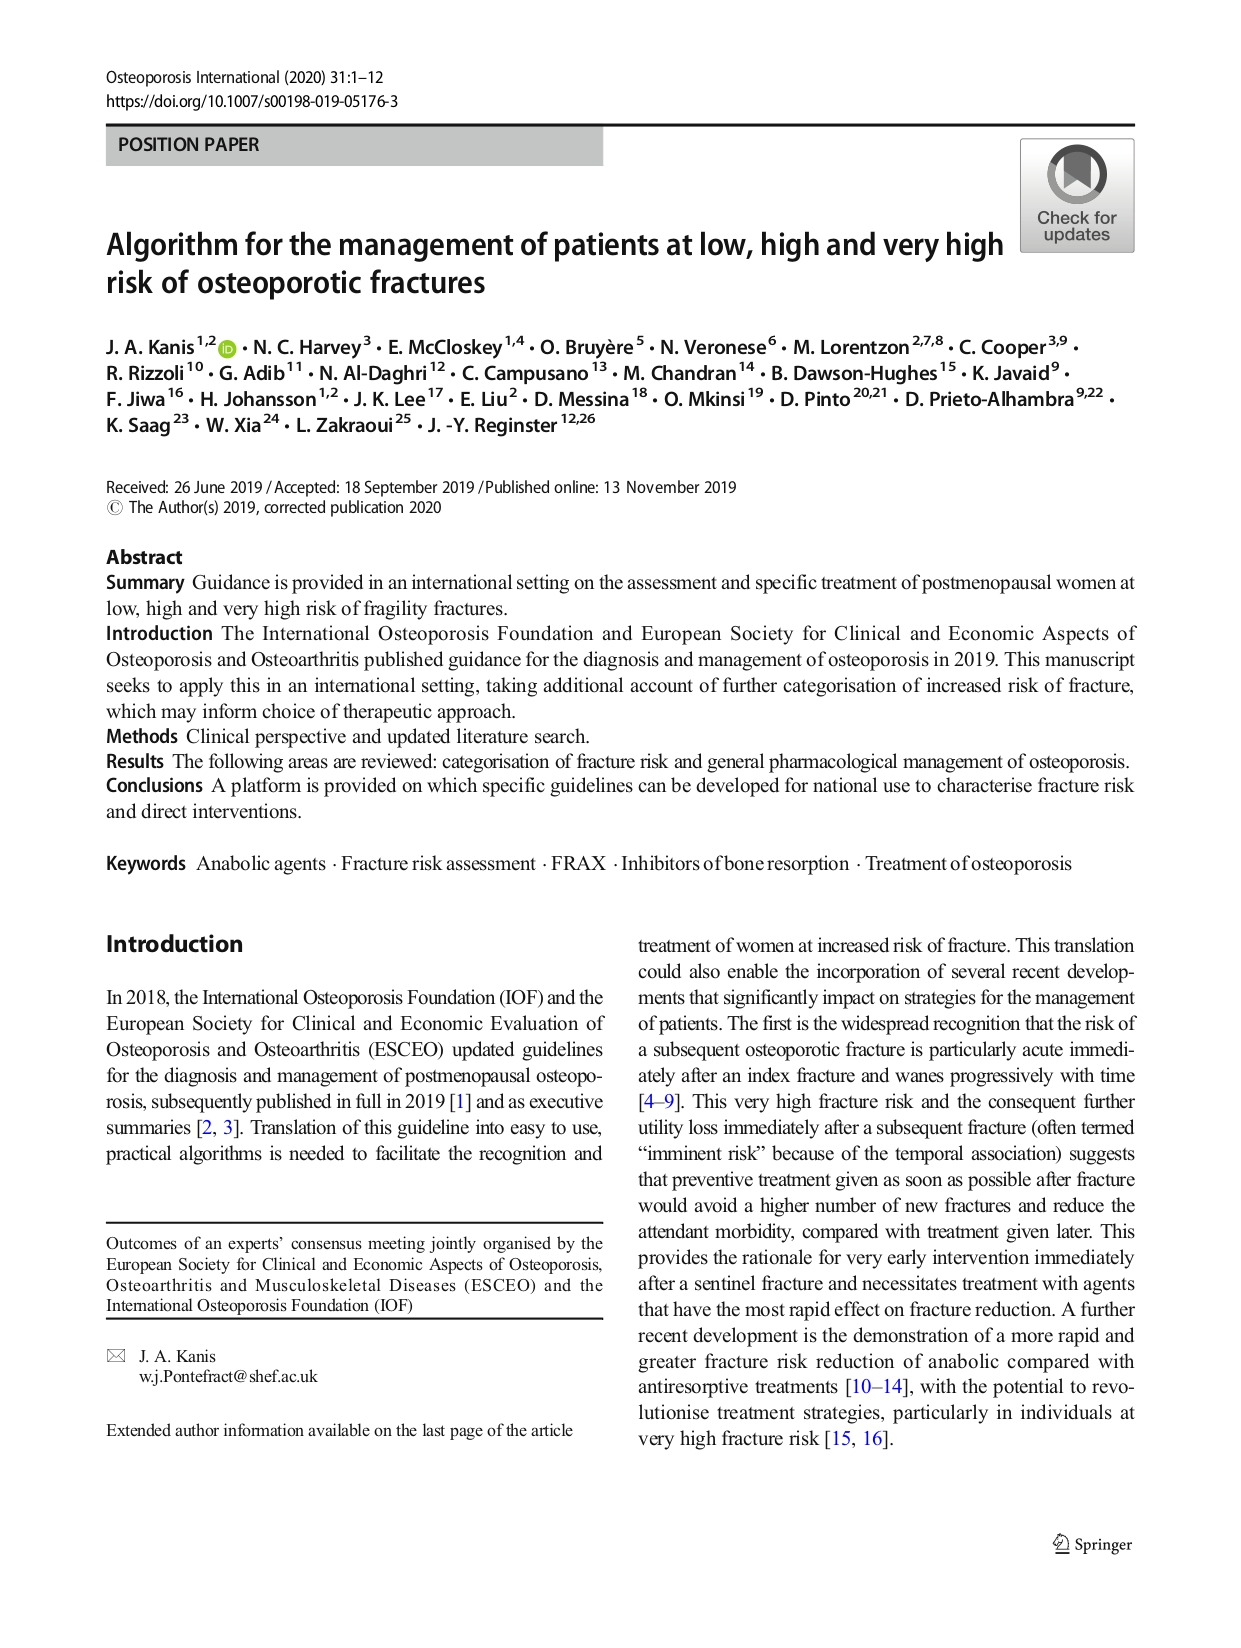 Algorithm for the management of patients at low, high and very high risk of osteoporotic fractures